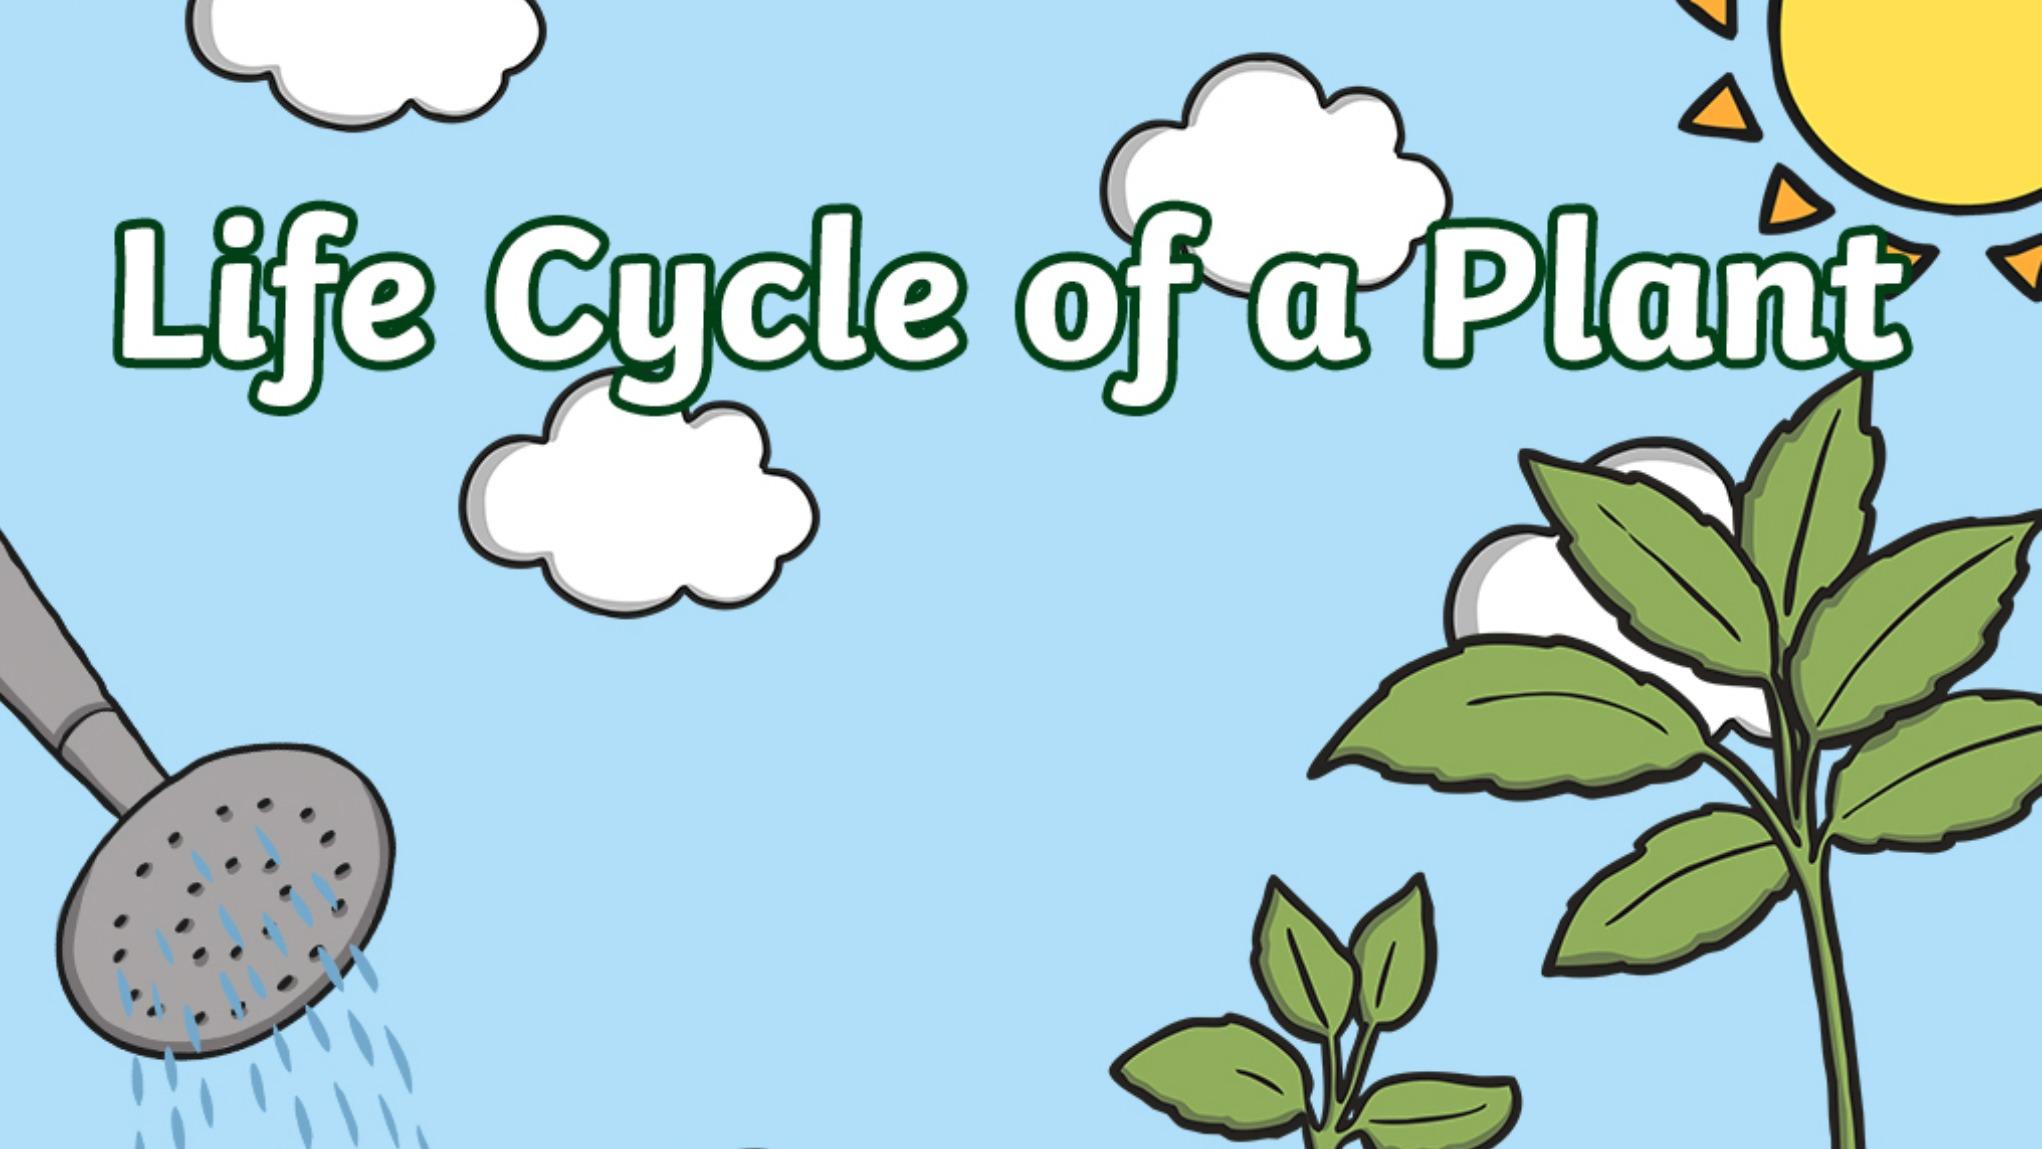 Life Cycle of a Plant